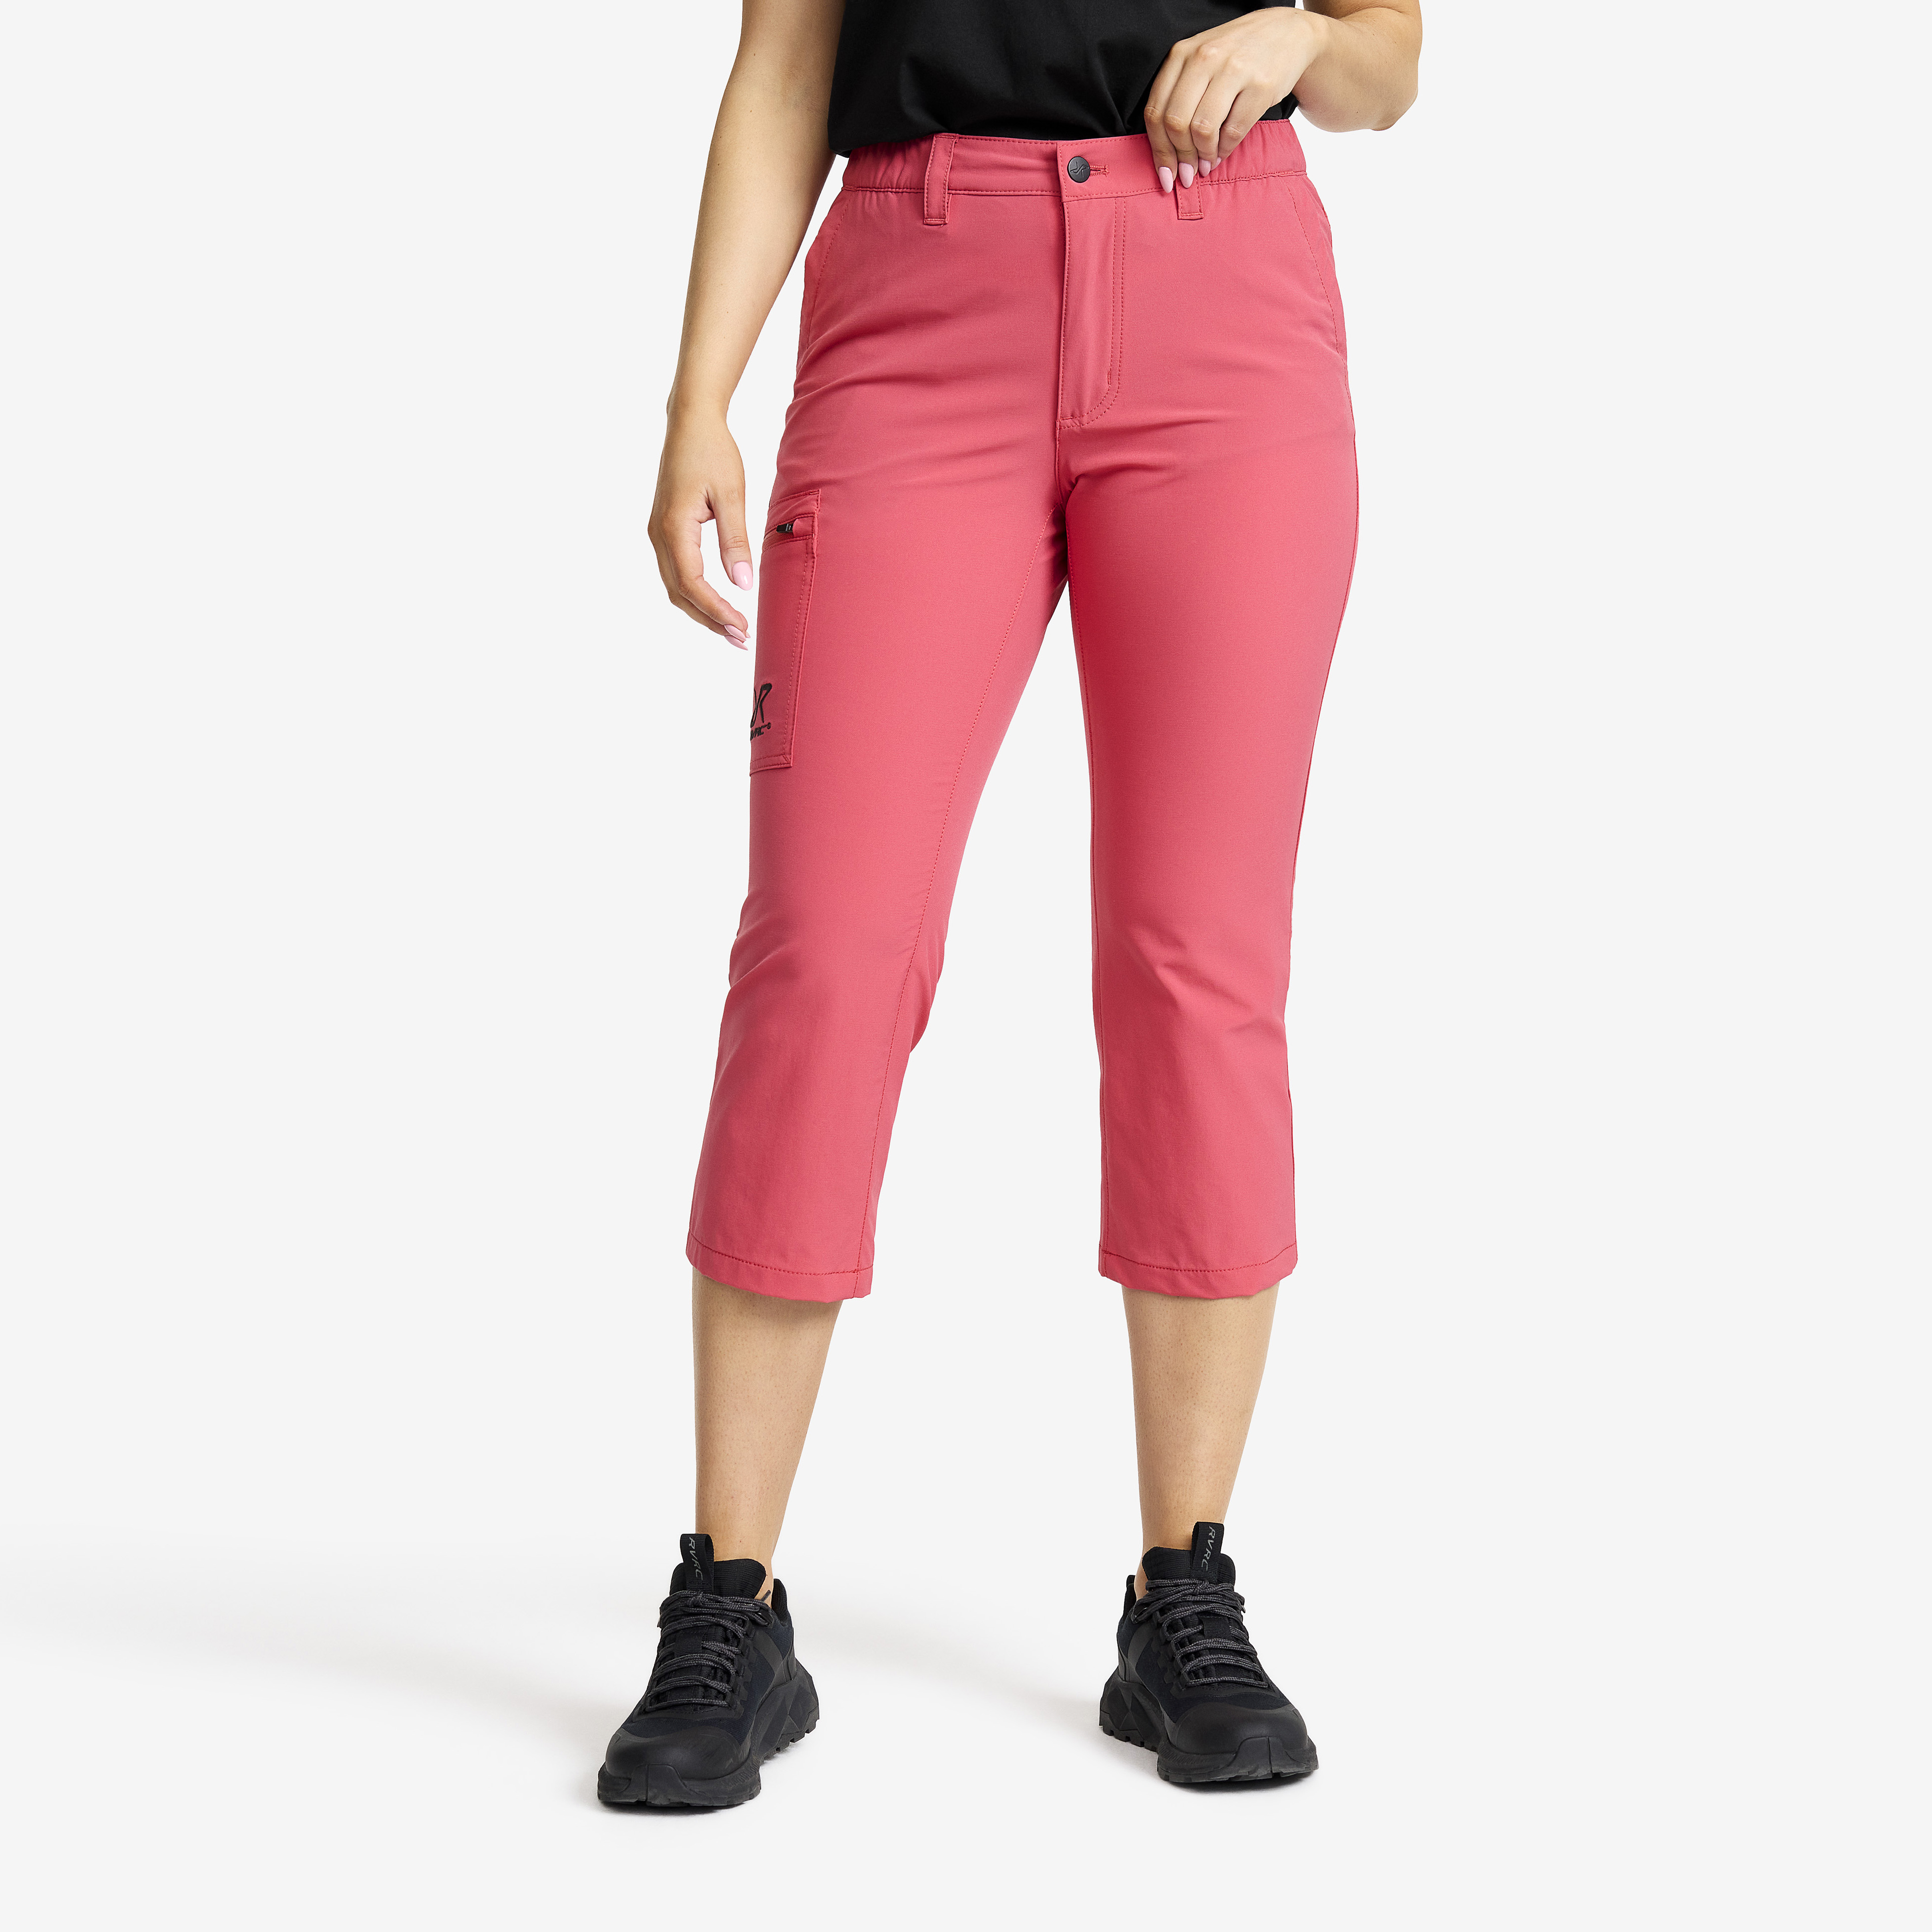 Loyal 3/4 Stretch Pants Holly Berry Mujeres